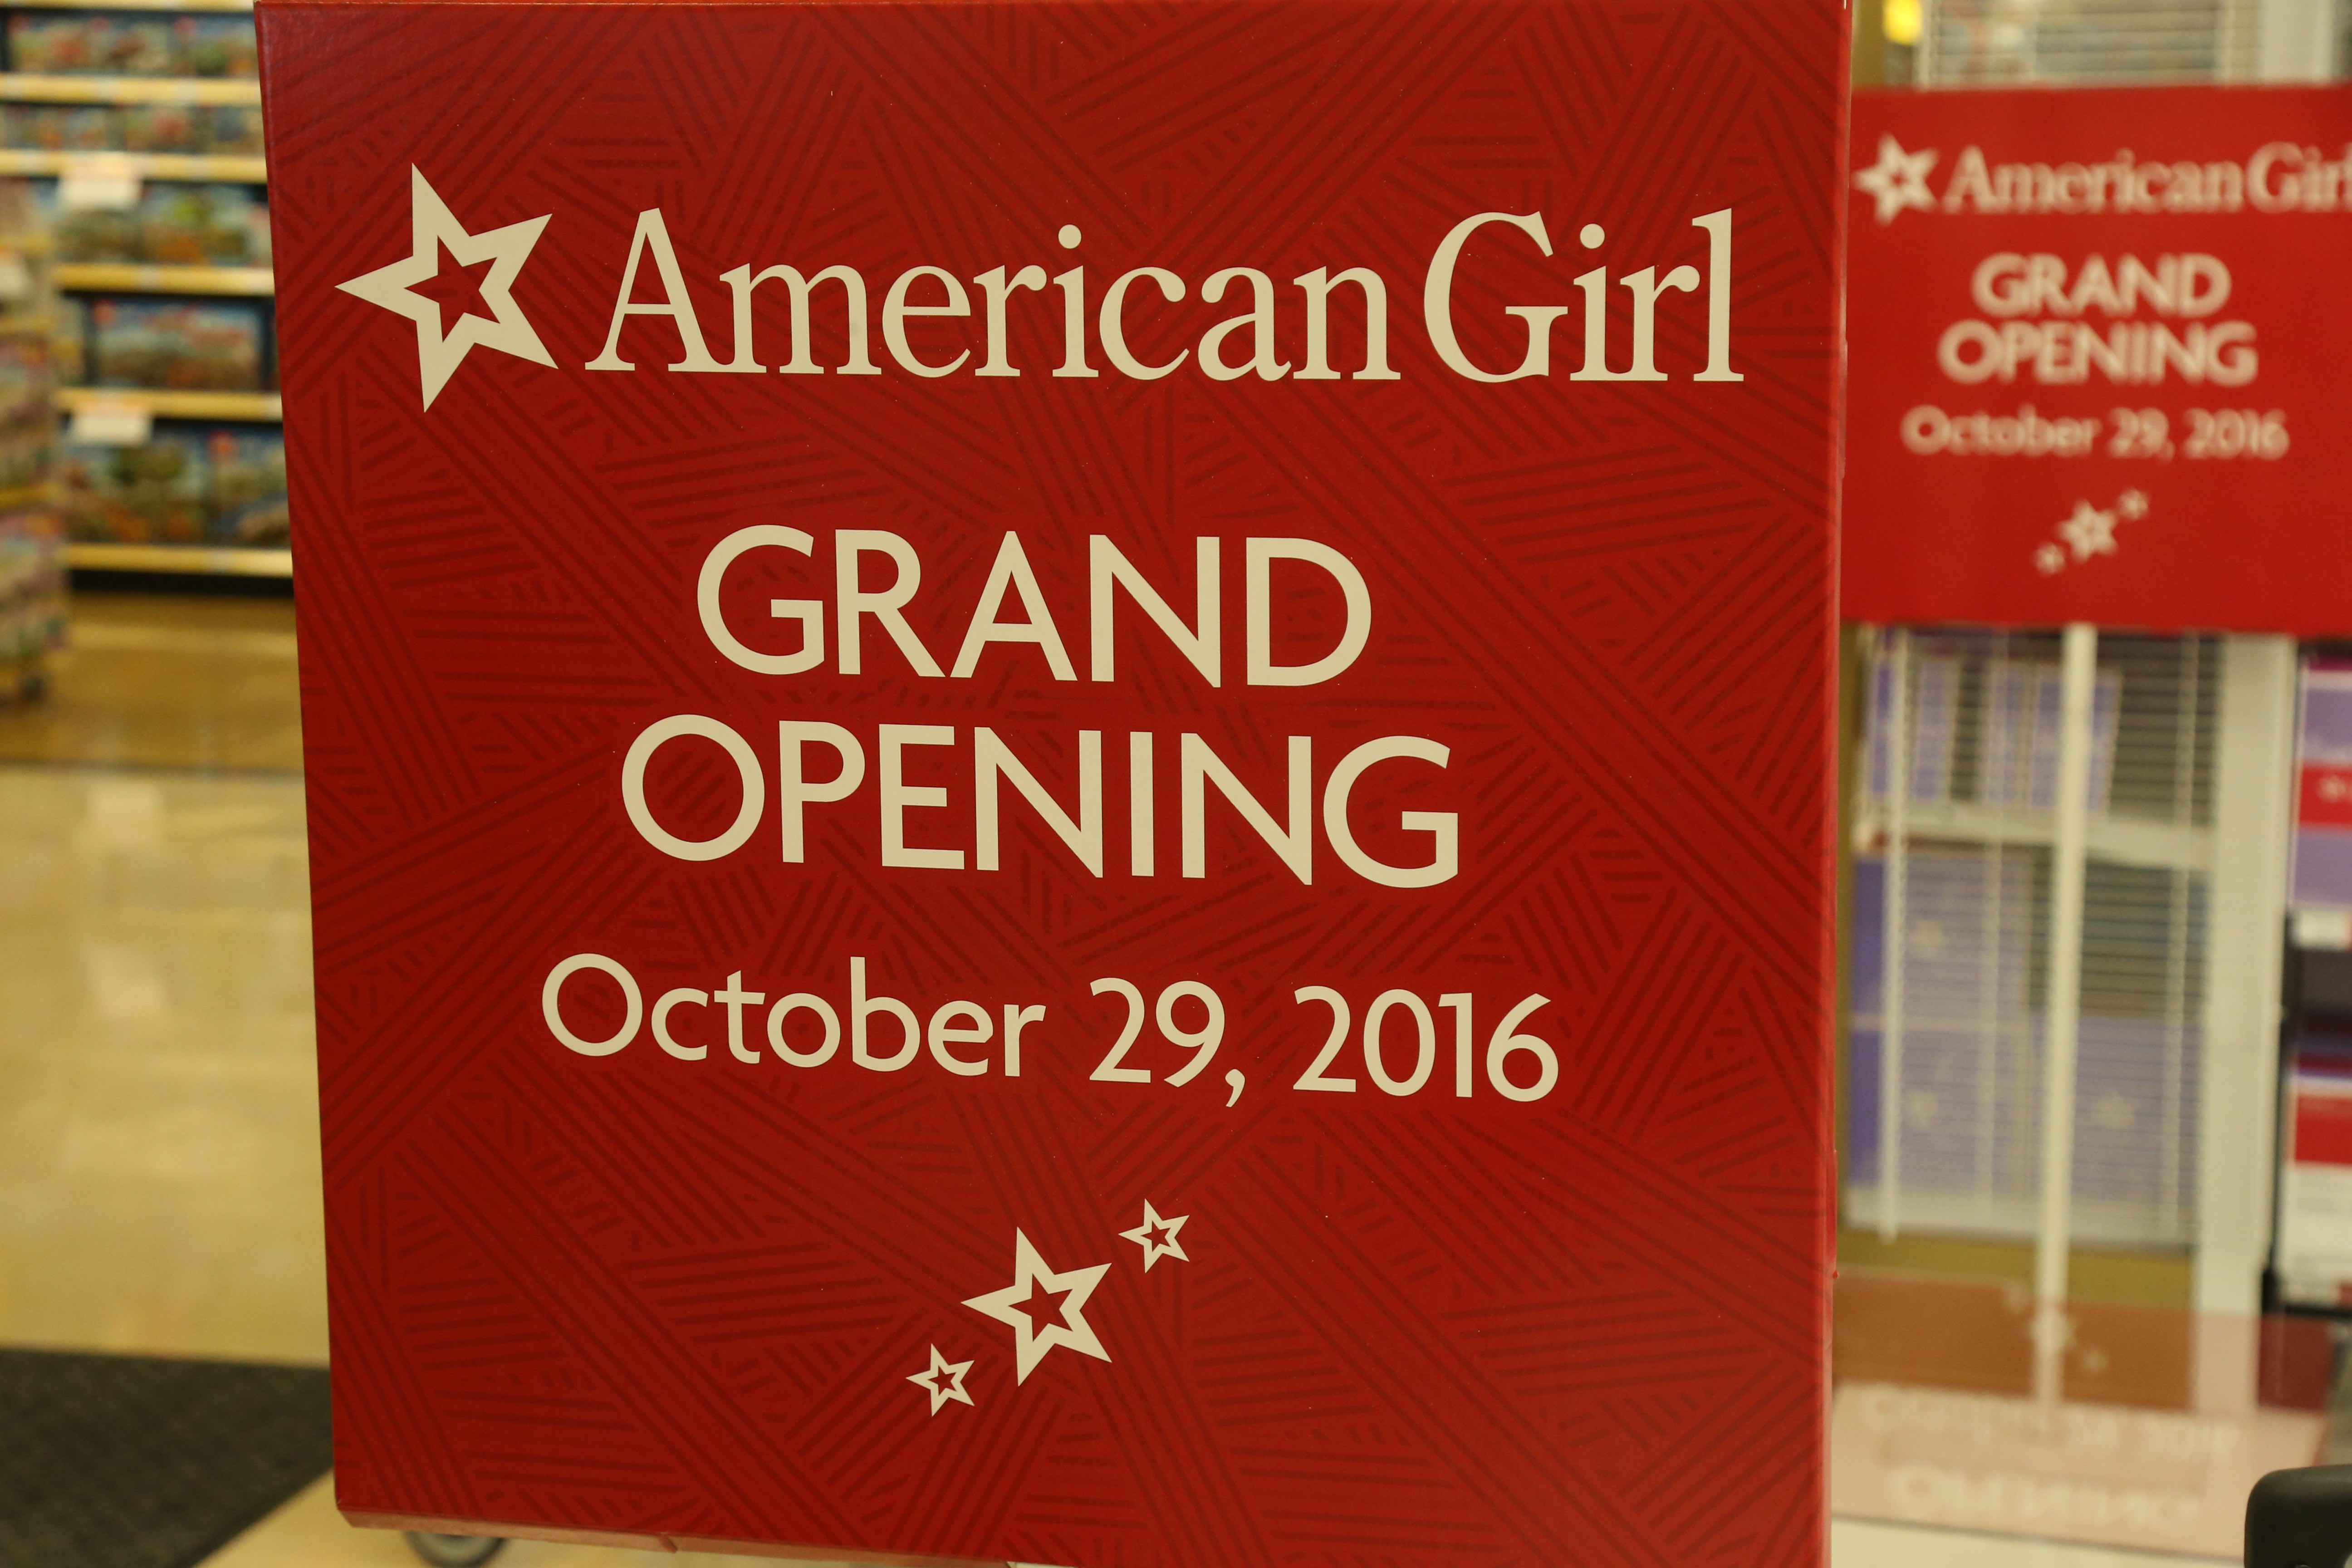 American Girl Shop Grand Openings at Toys "R" Us